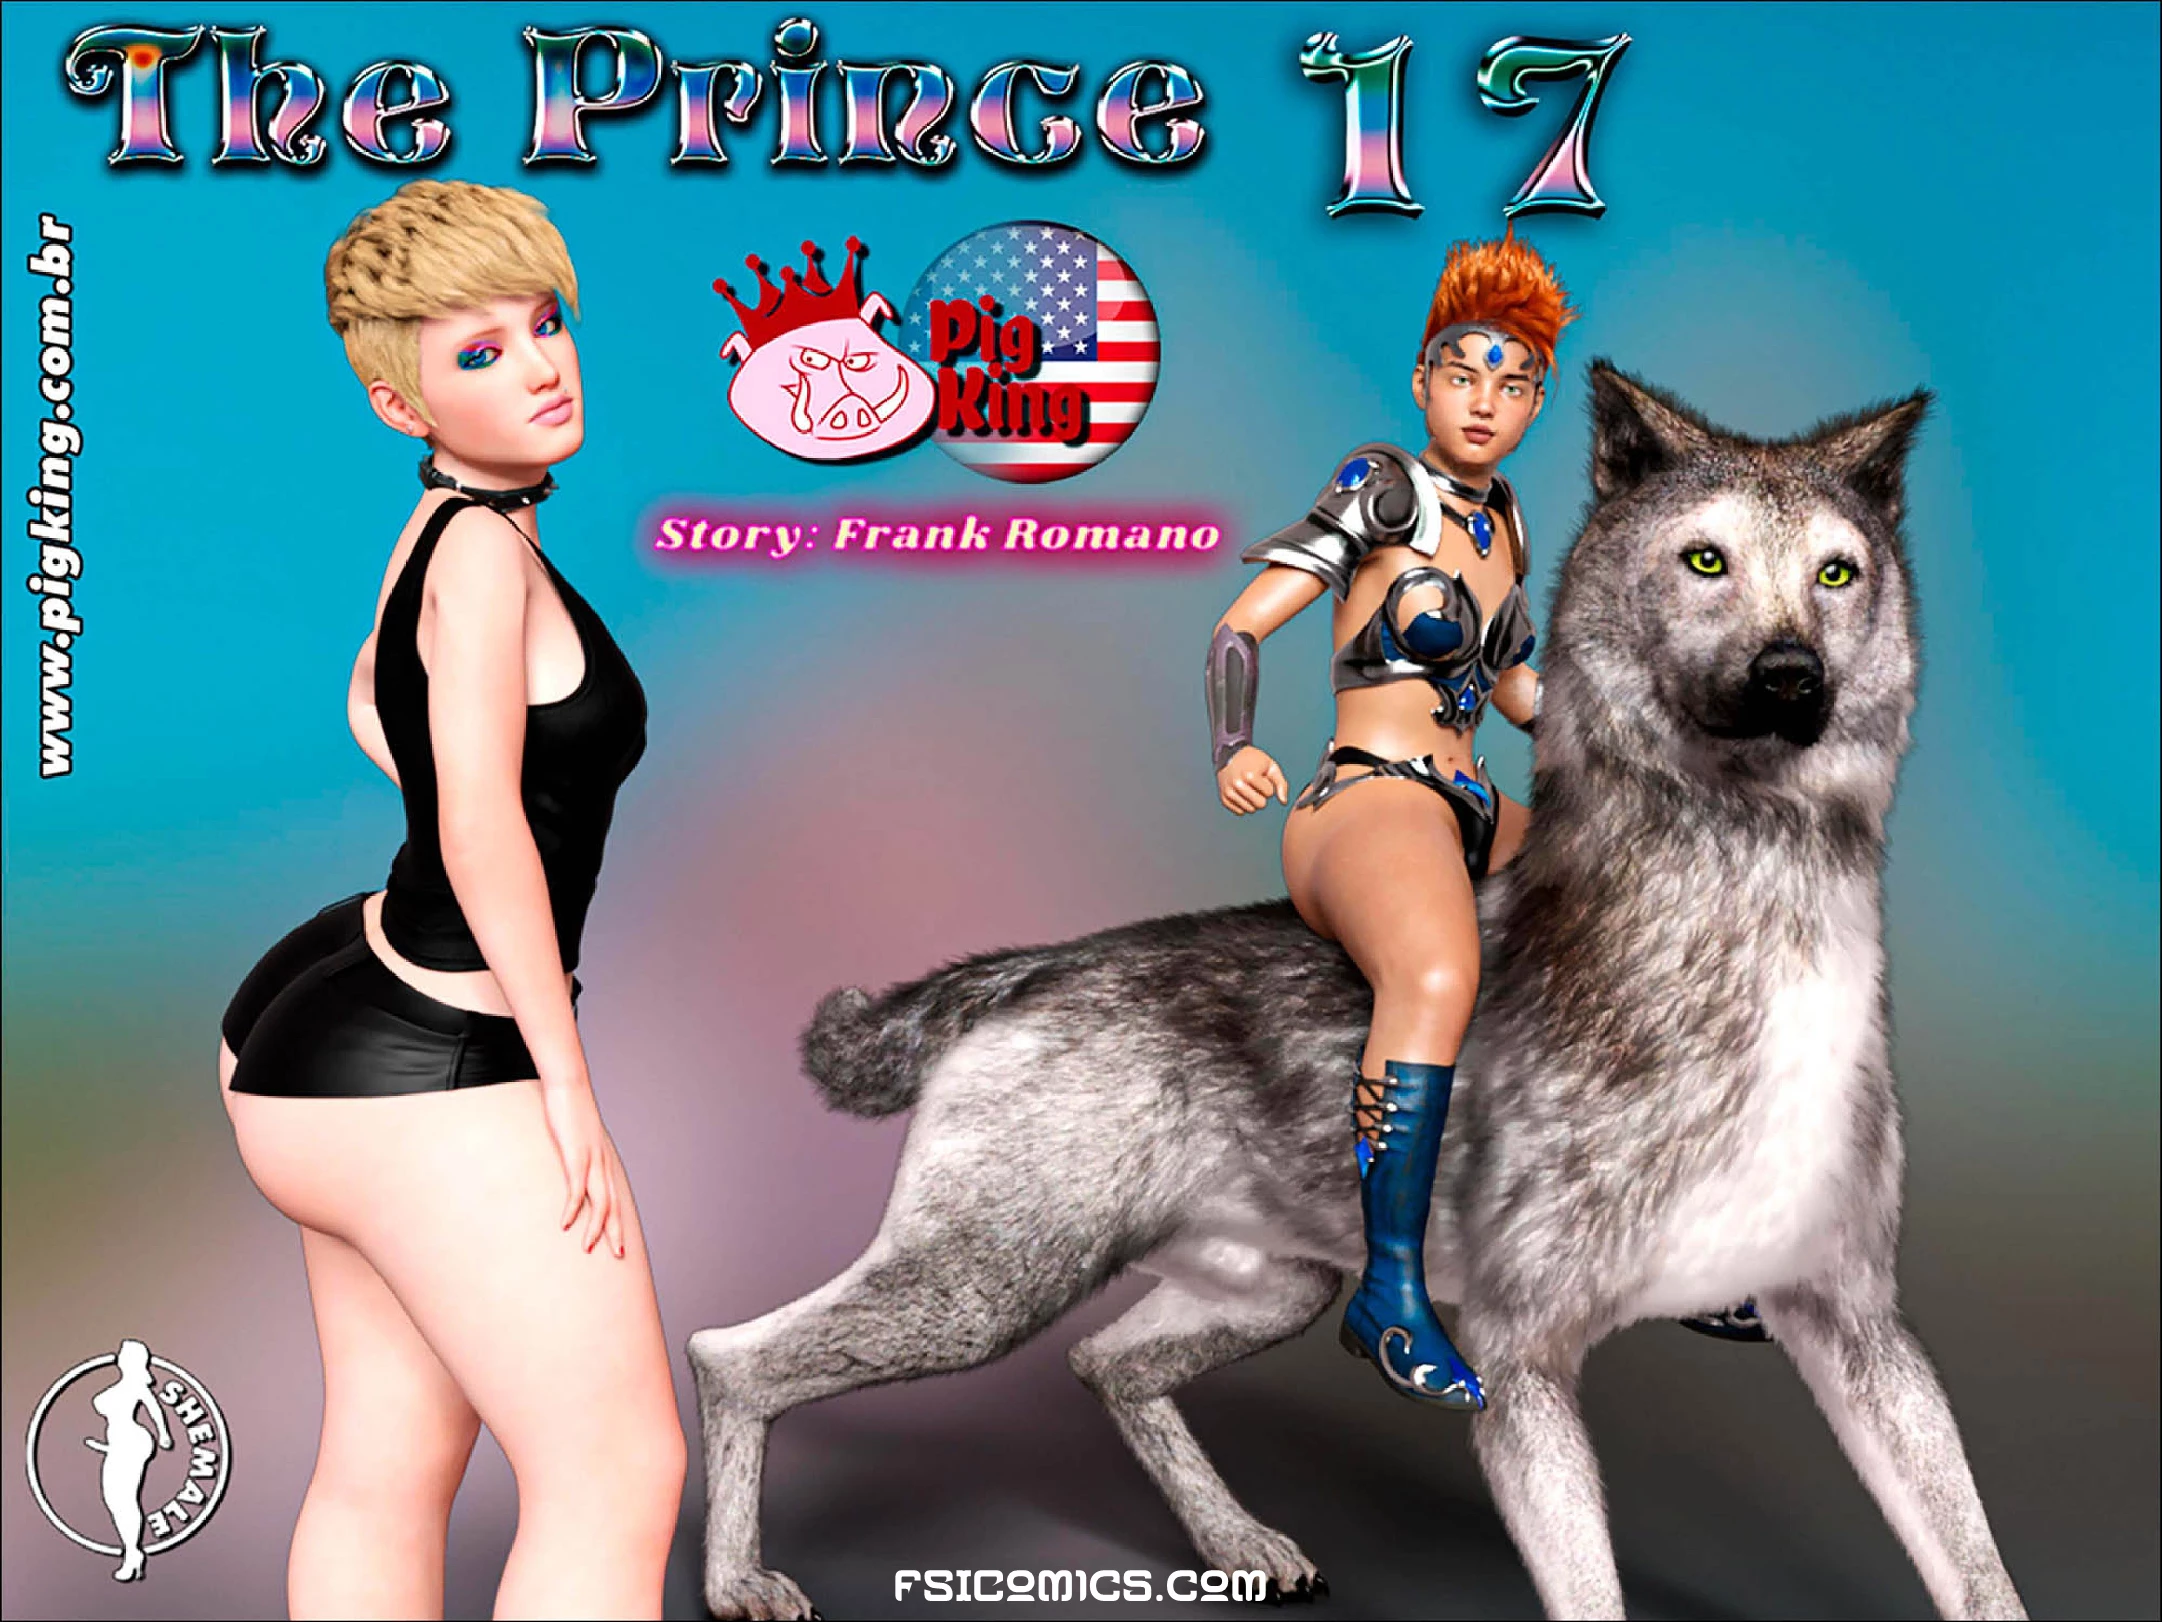 The Prince Chapter 17 – PigKing - 202 - FSIComics